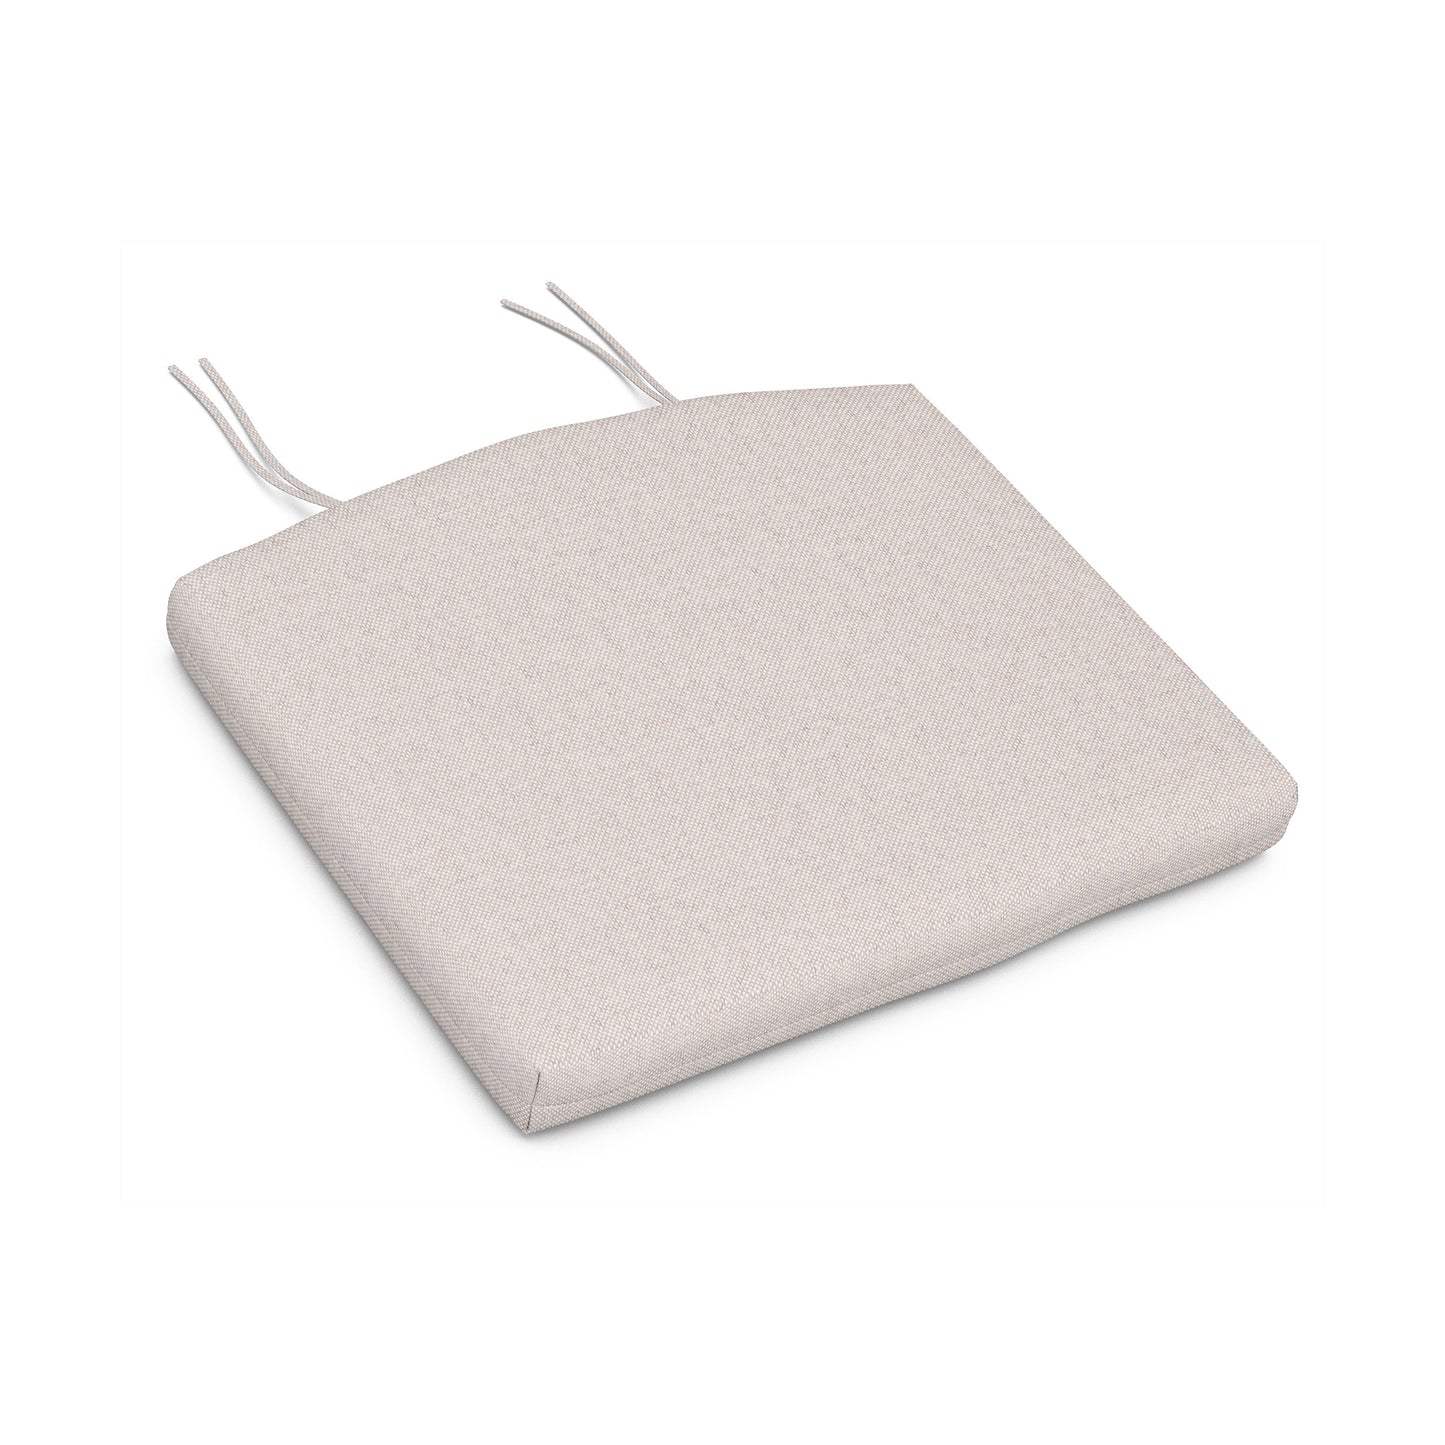 A beige POLYWOOD® XPWS0153 - Seat Cushion with two ties at the back, displayed on a white background. The cushion is square-shaped with a slightly textured, weather-resistant upholstery fabric surface.